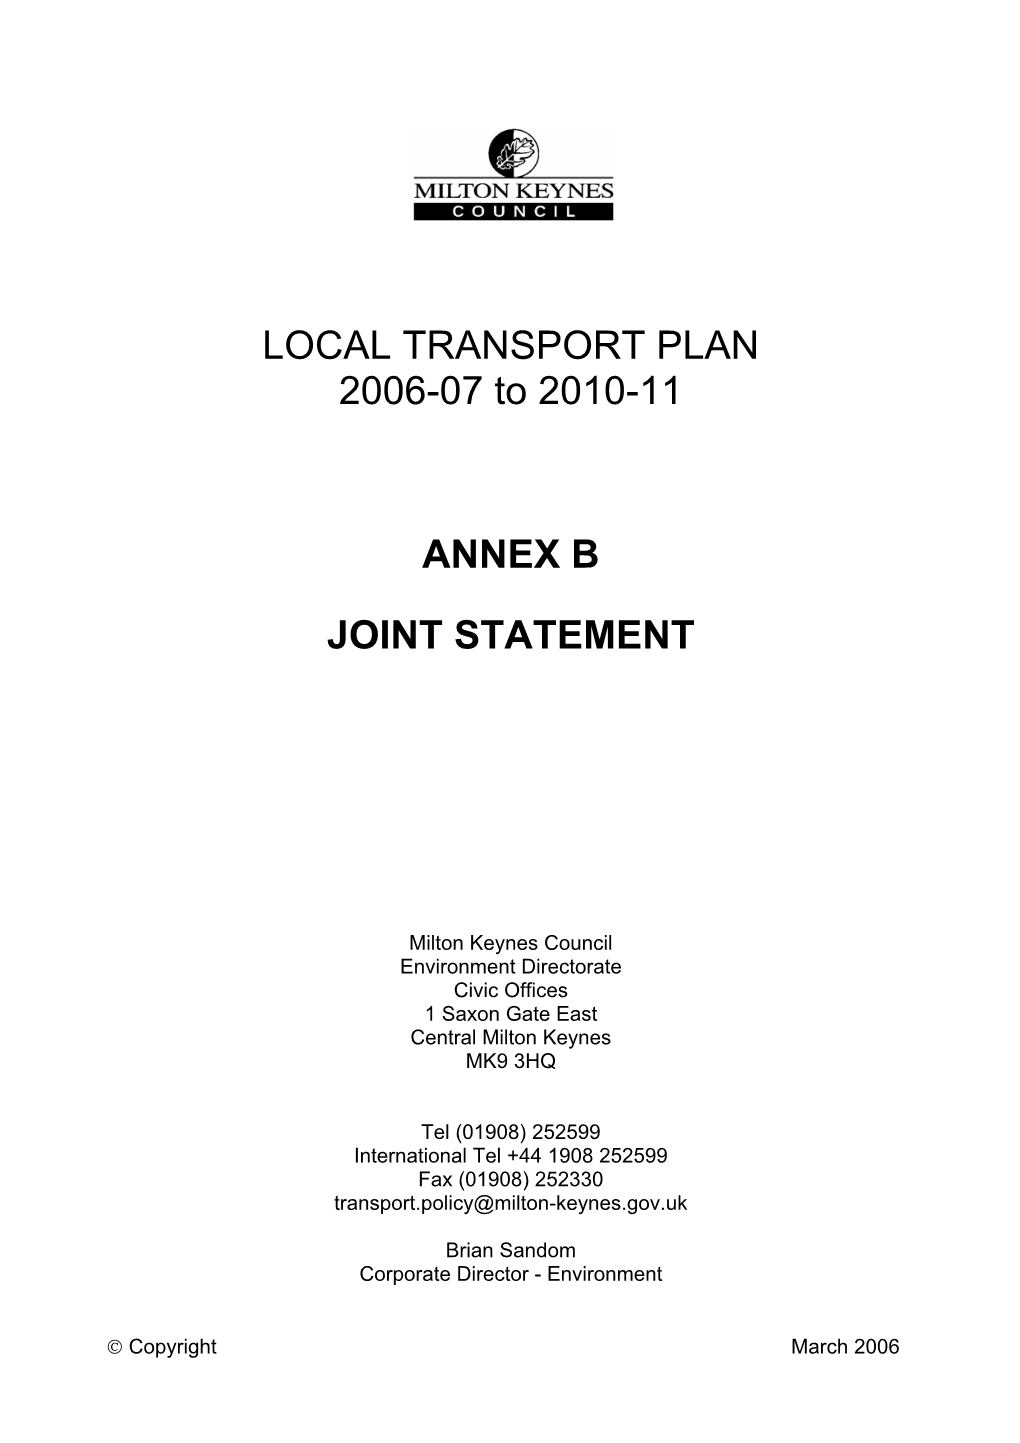 LOCAL TRANSPORT PLAN 2006-07 to 2010-11 ANNEX B JOINT